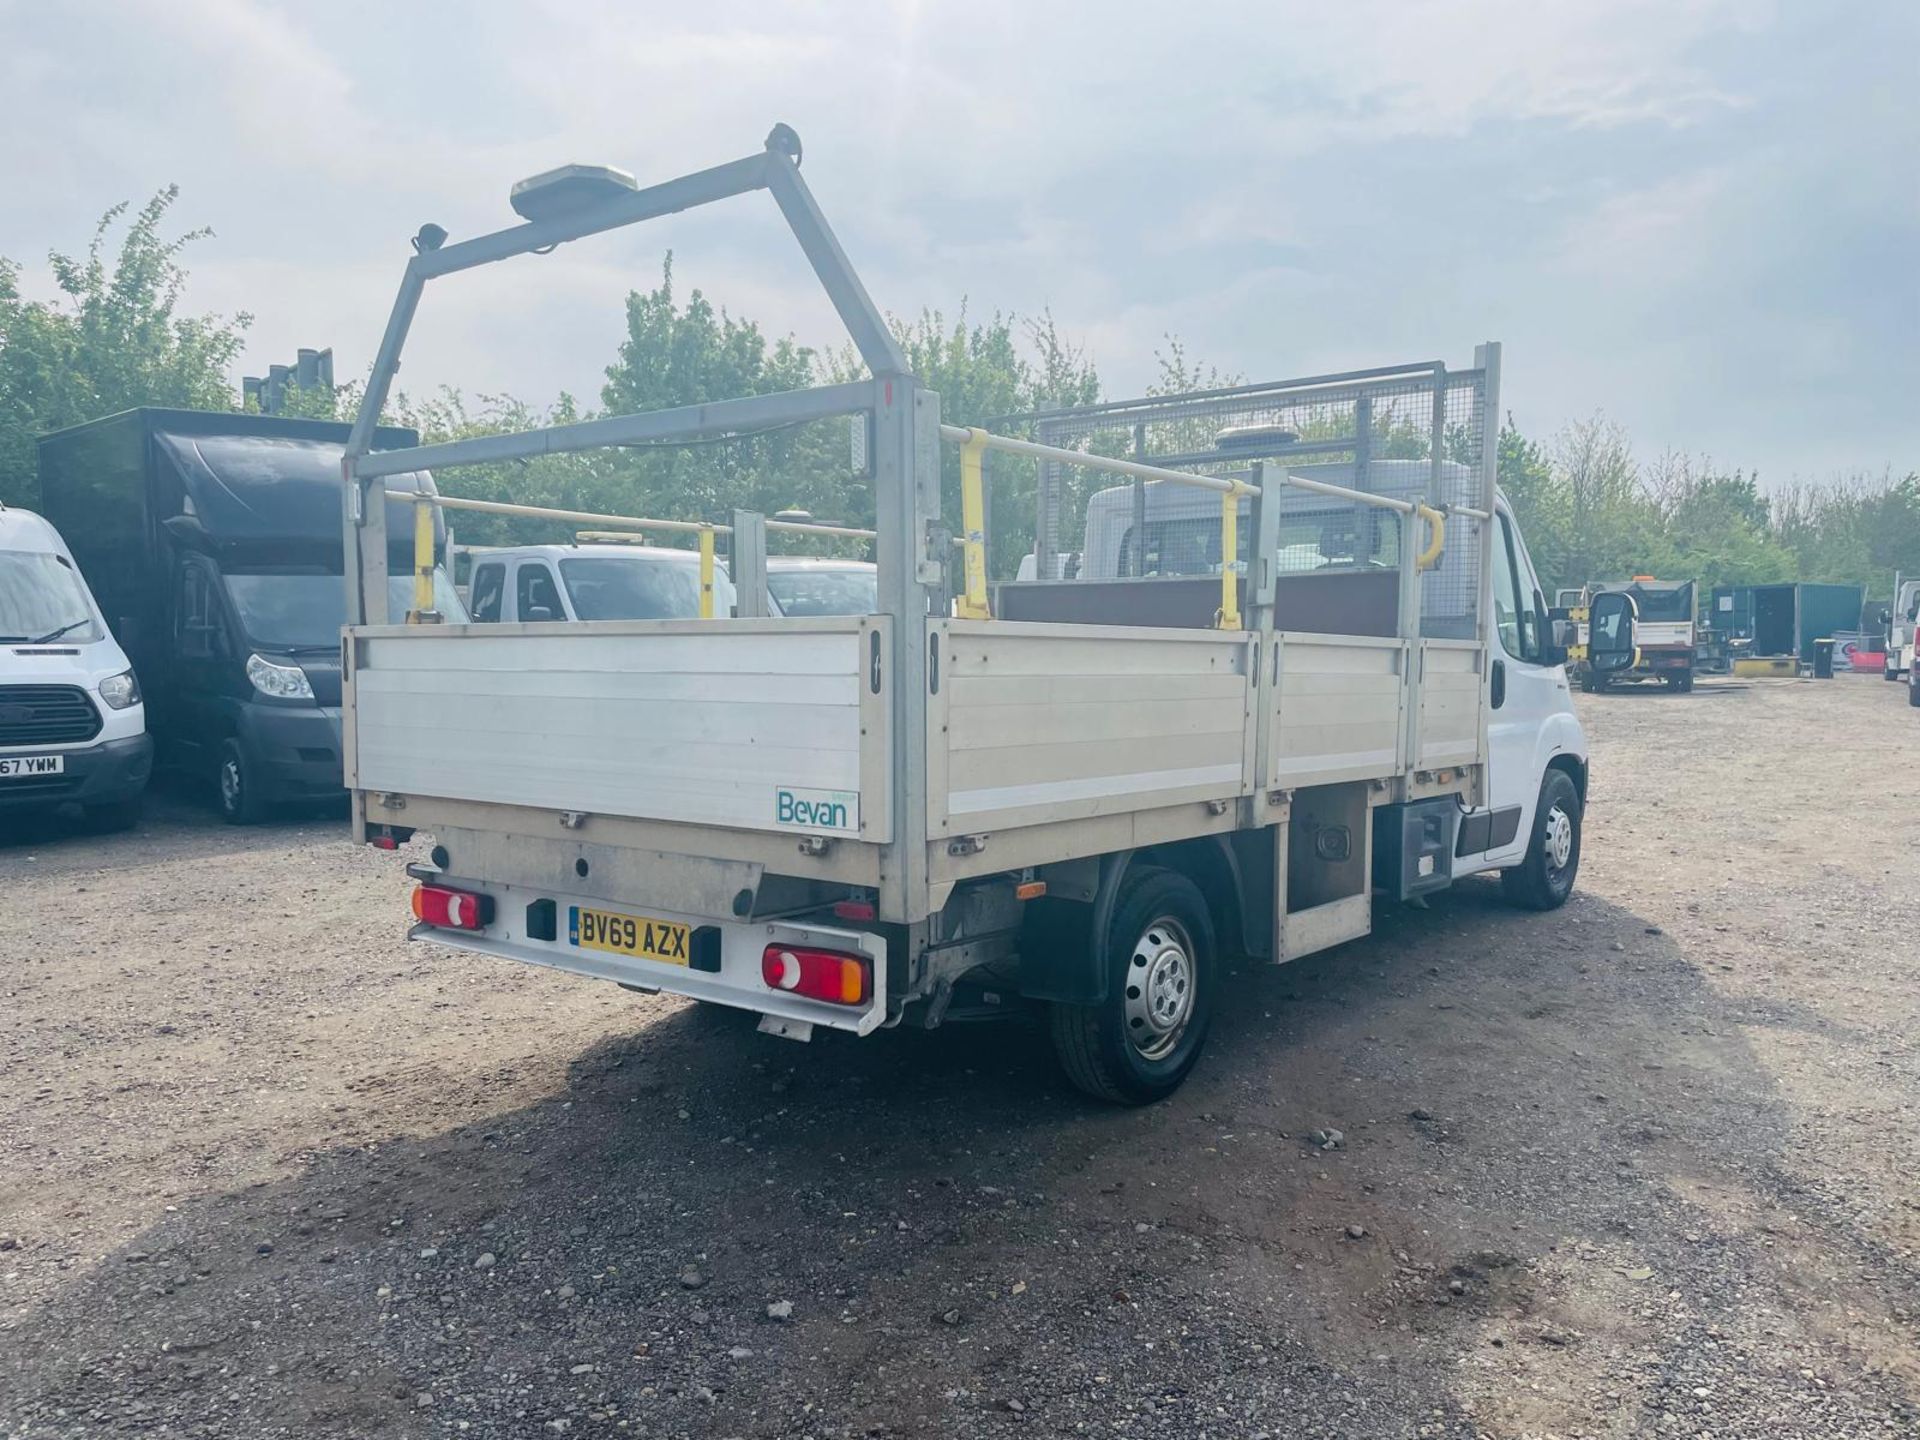 Fiat Ducato 35 Maxi 2.3 MultiJet 130 L3H1 Dropside 2019 '69 Reg'-1 Former keepers - Only 76,029 - Image 11 of 27